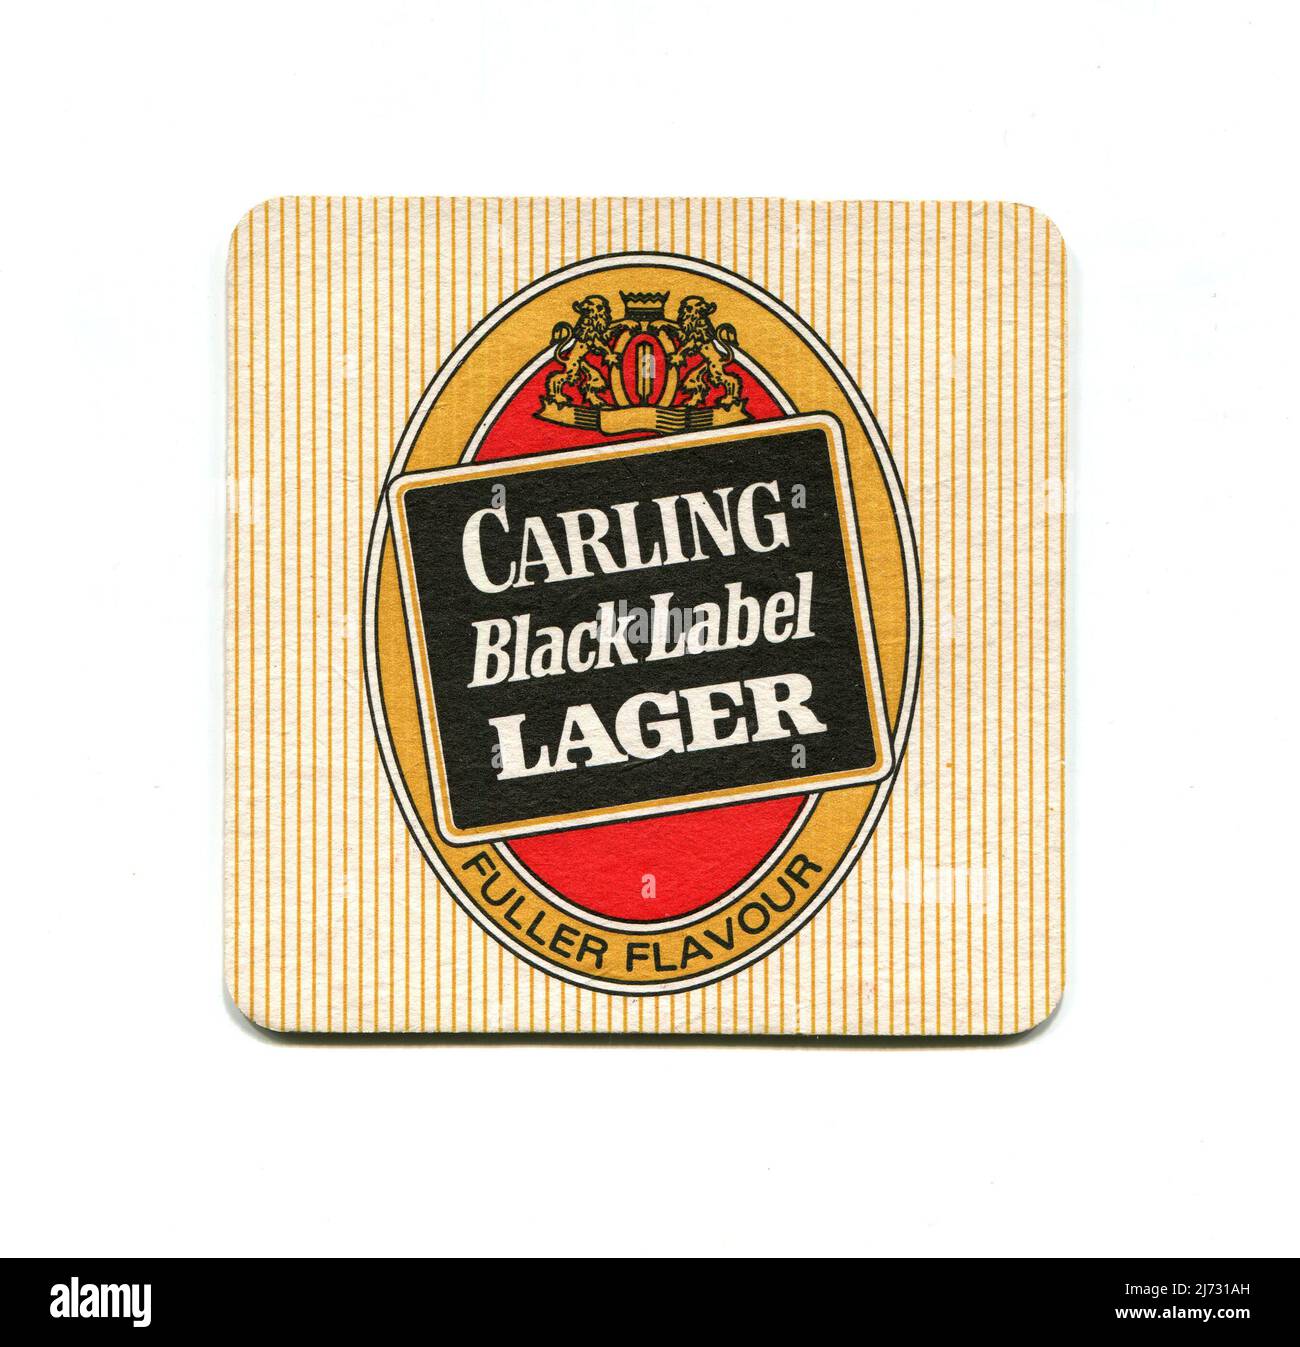 A vintage Carling Black Label beer mat dating from the 1980s. Stock Photo